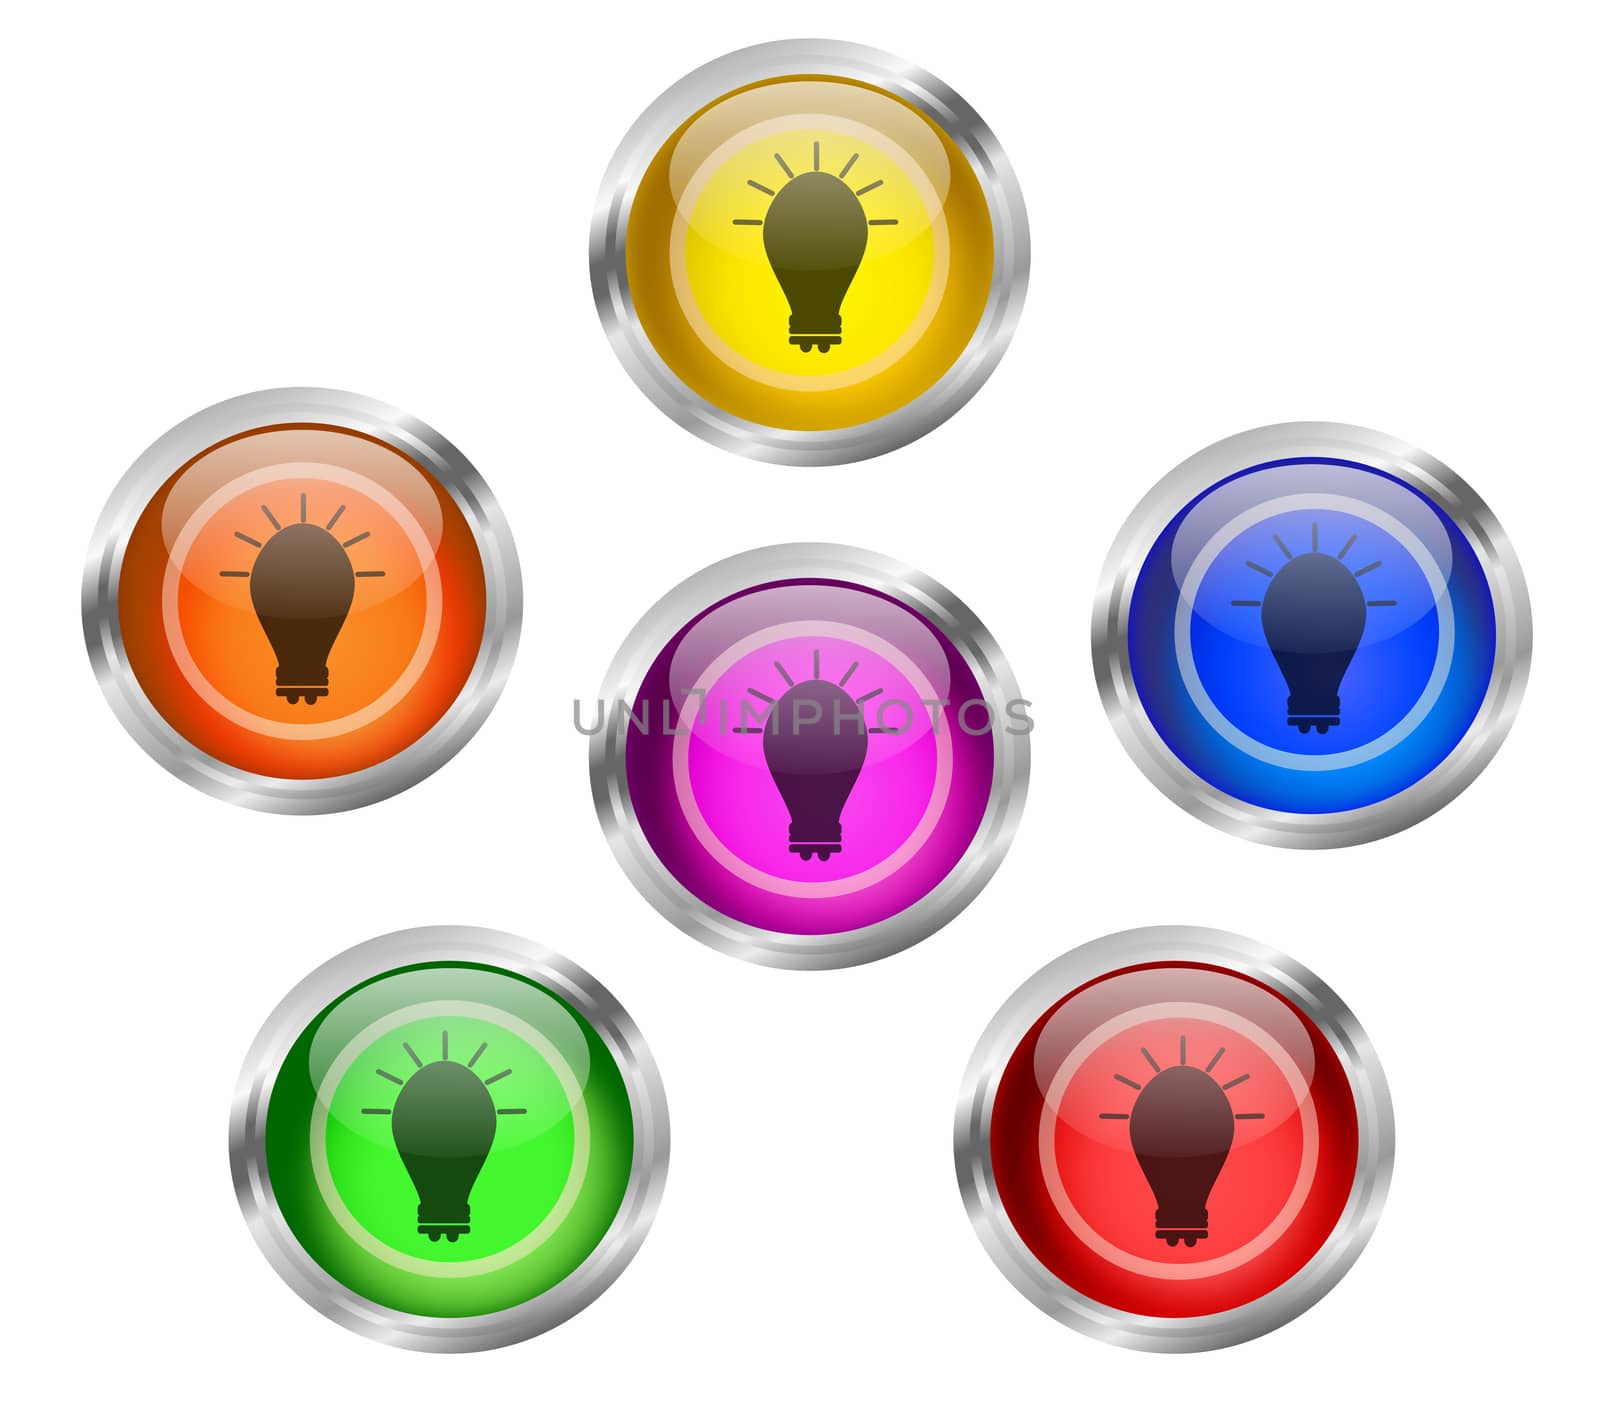 A collection of light bulb icon buttons or badges
